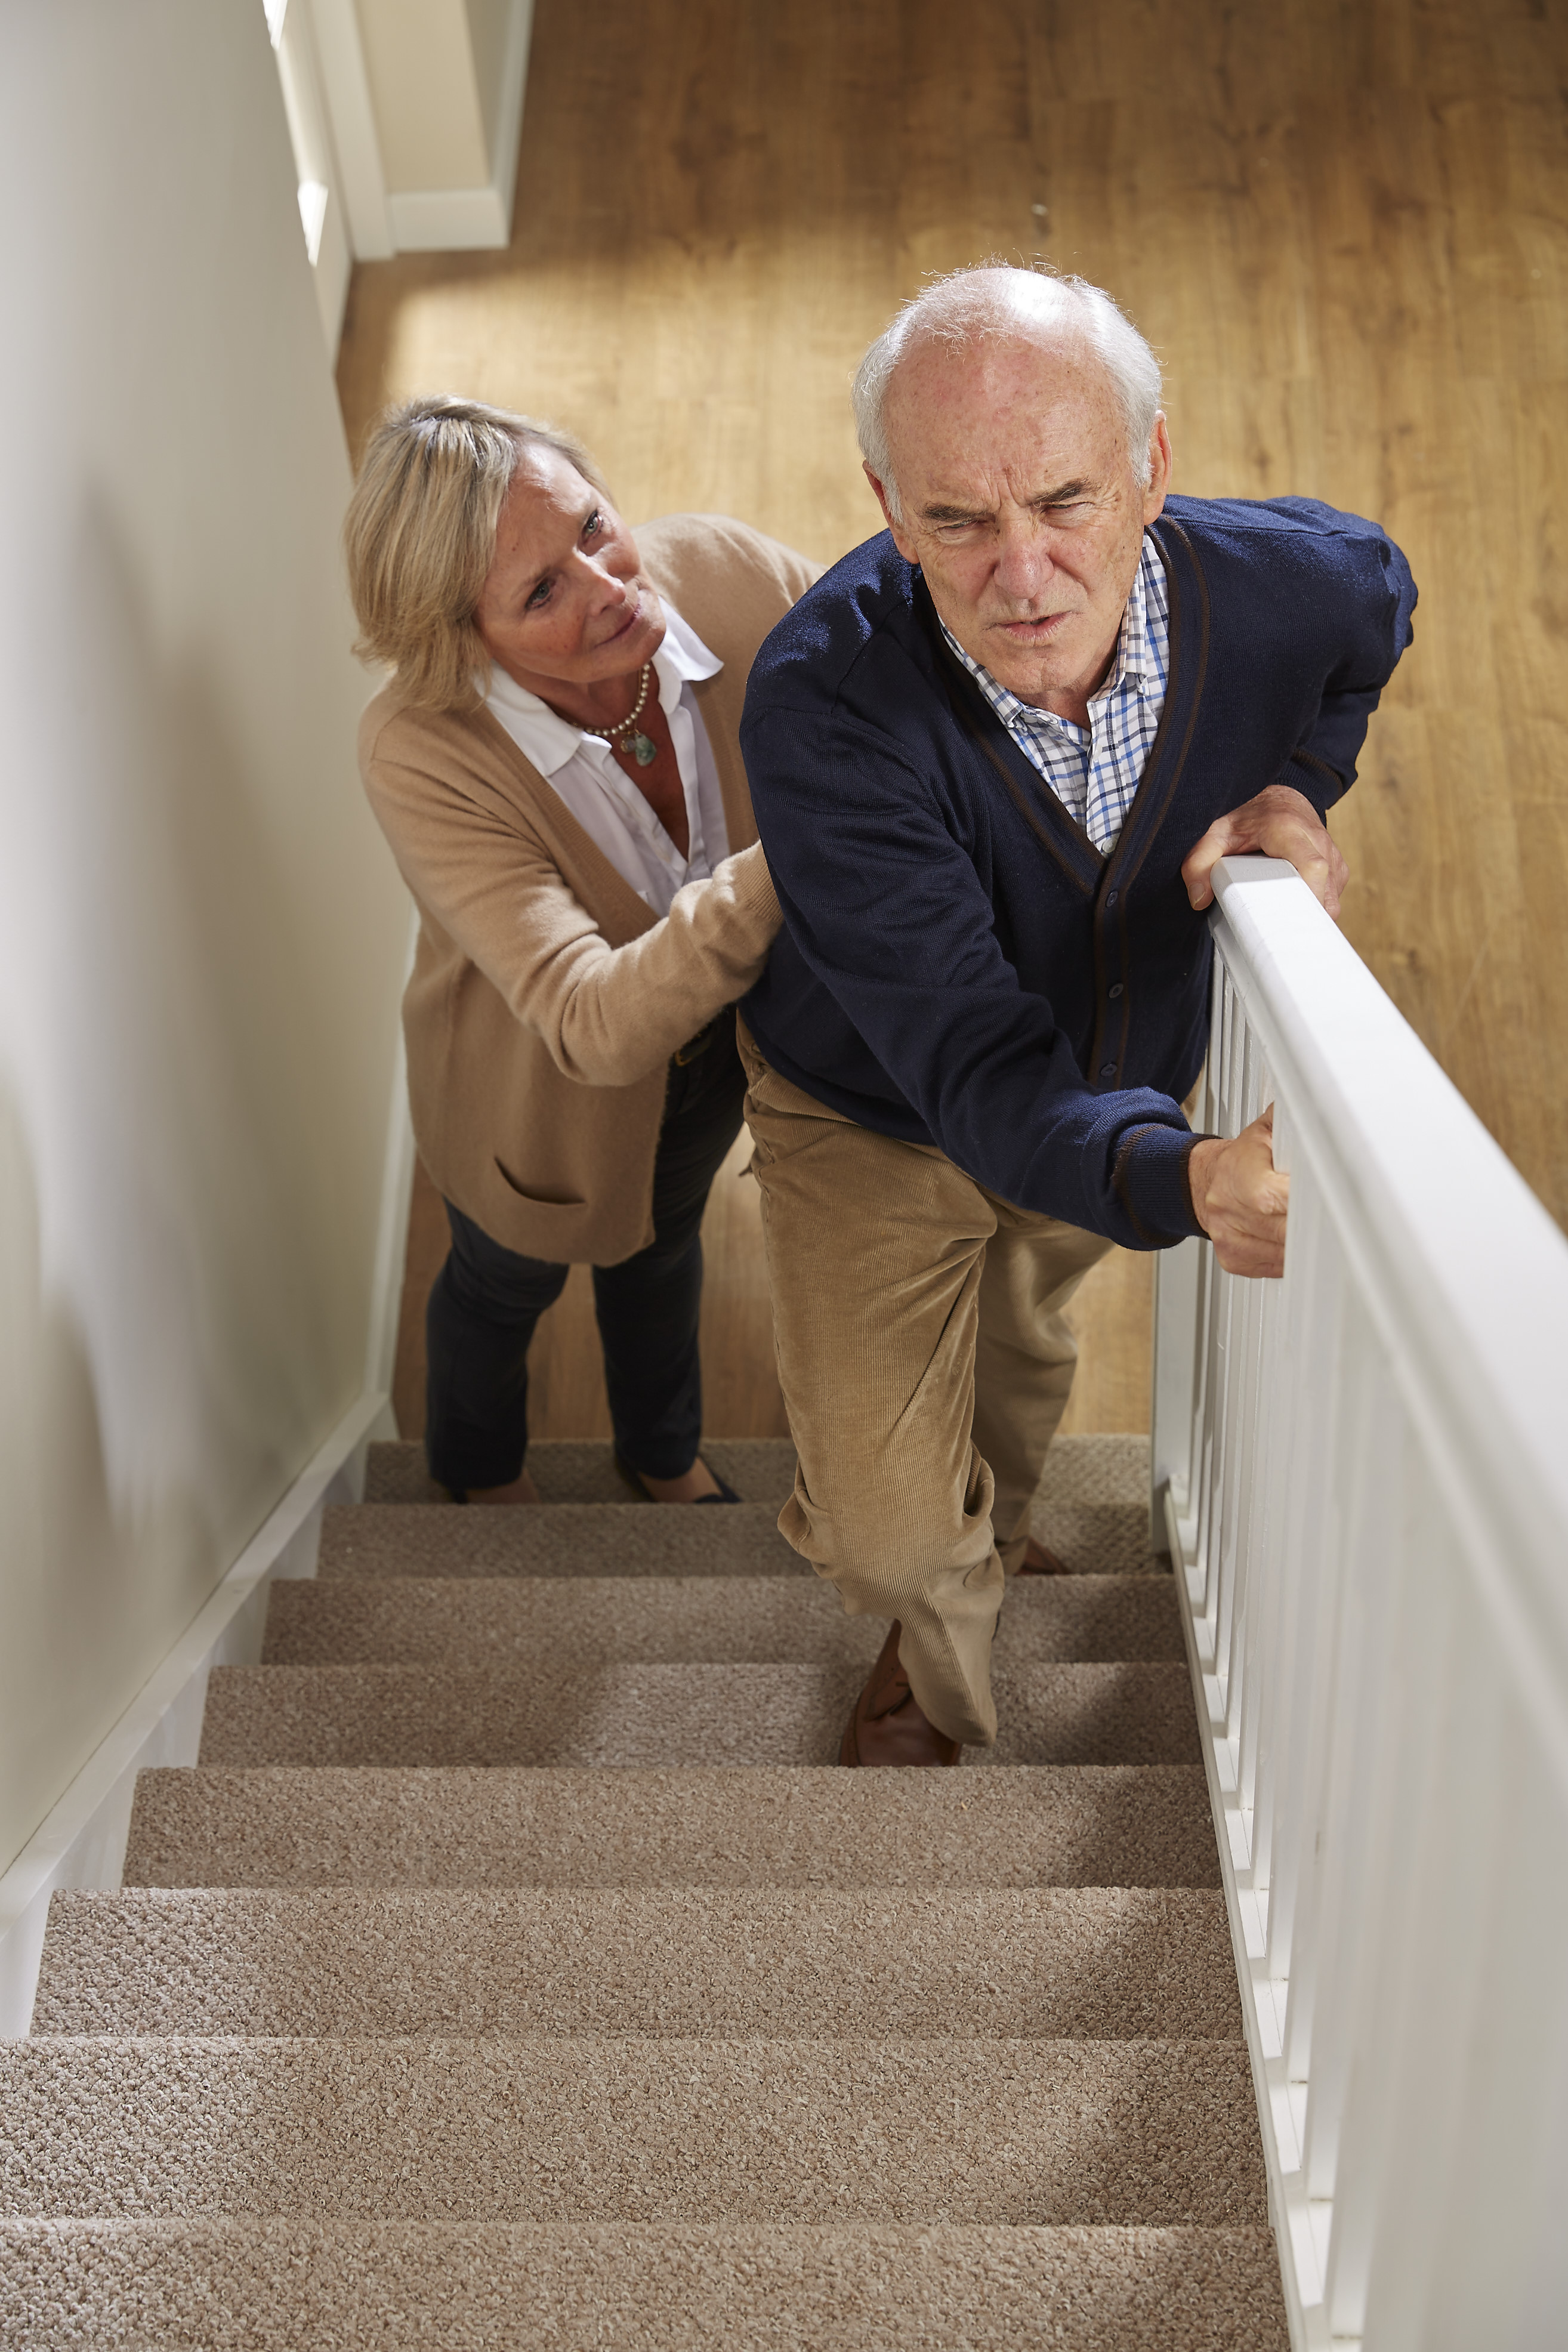 Enhance your quality of life with an Acorn Stairlift